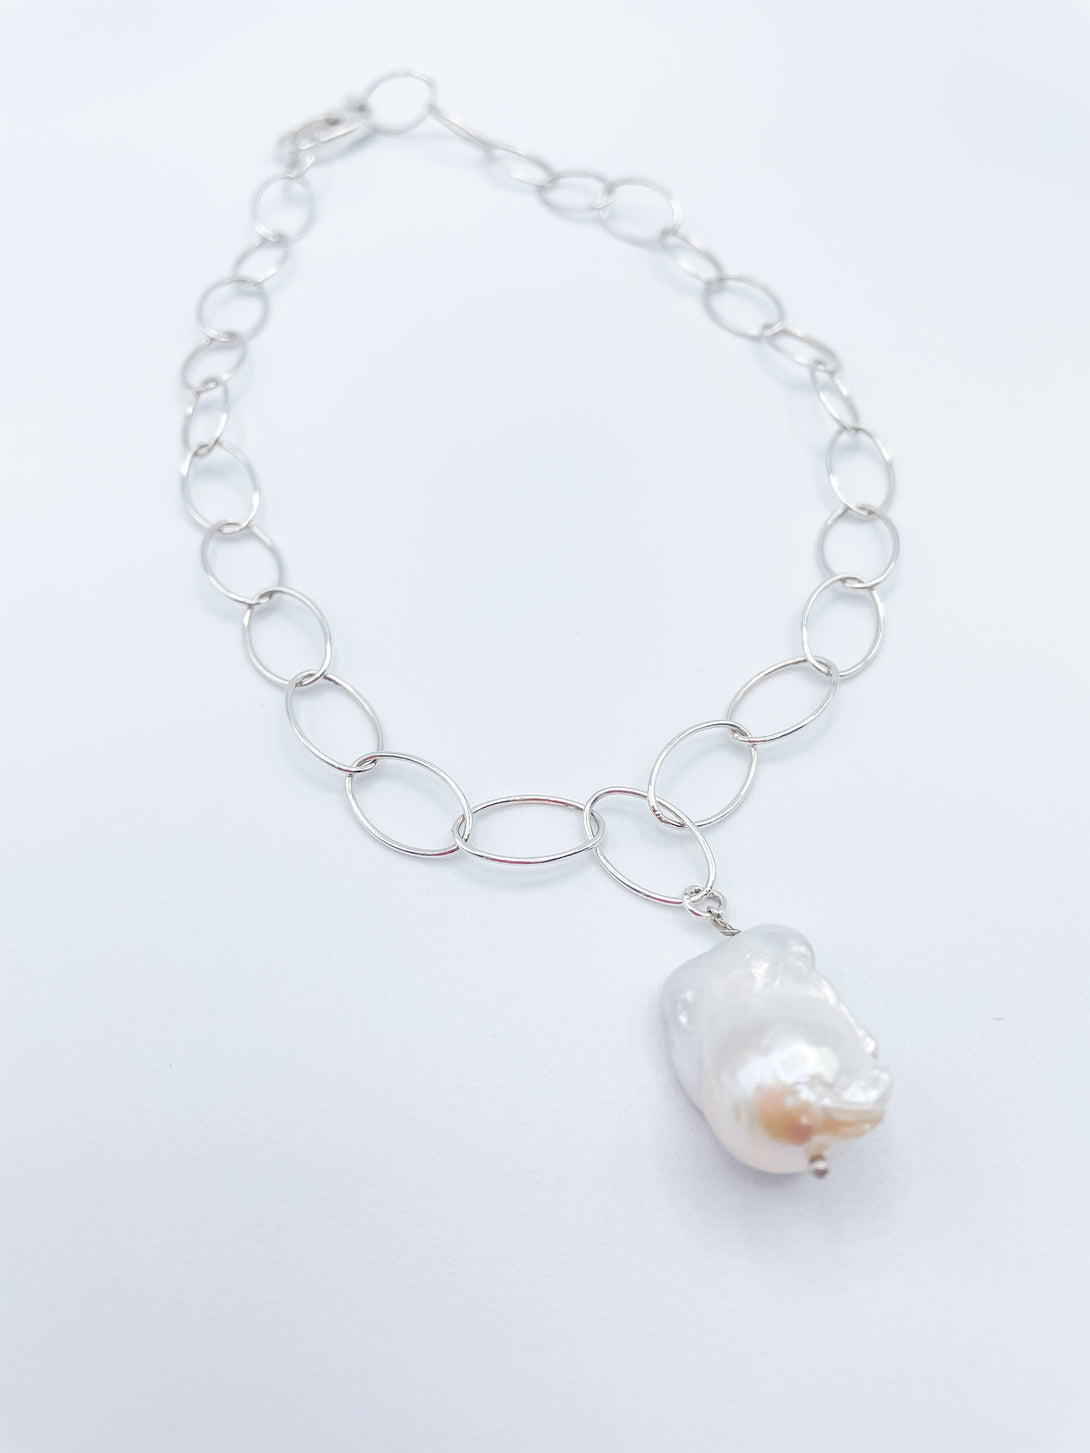 Sterling Silver Necklace with Striking Oval Chain and Large Baroque Freshwater Pearl